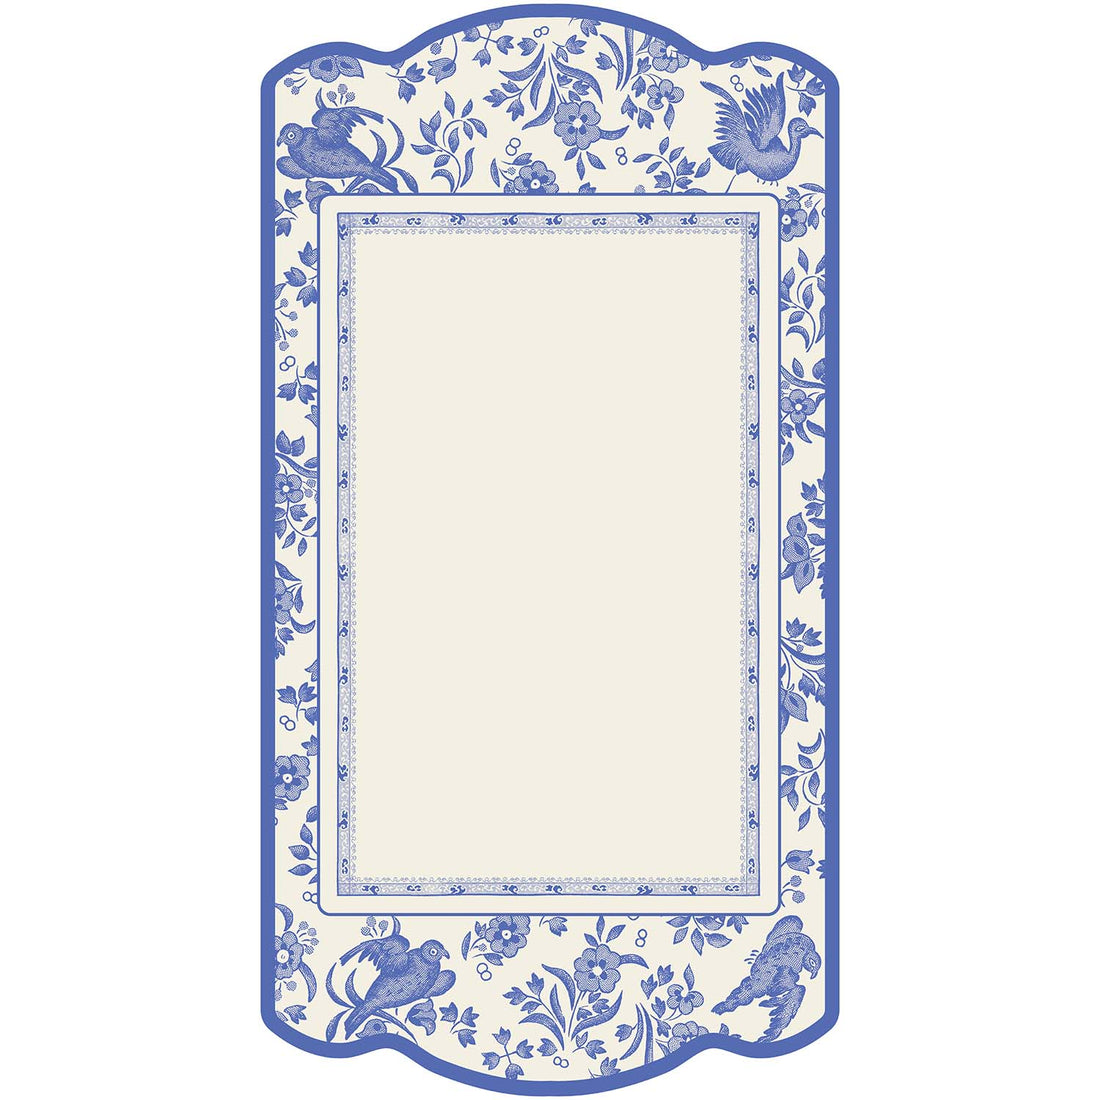 A die-cut rectangular card framed by a blue vintage Burleigh-style design of birds, flowers and filagree. The center is a blank white rectangle for personalization.